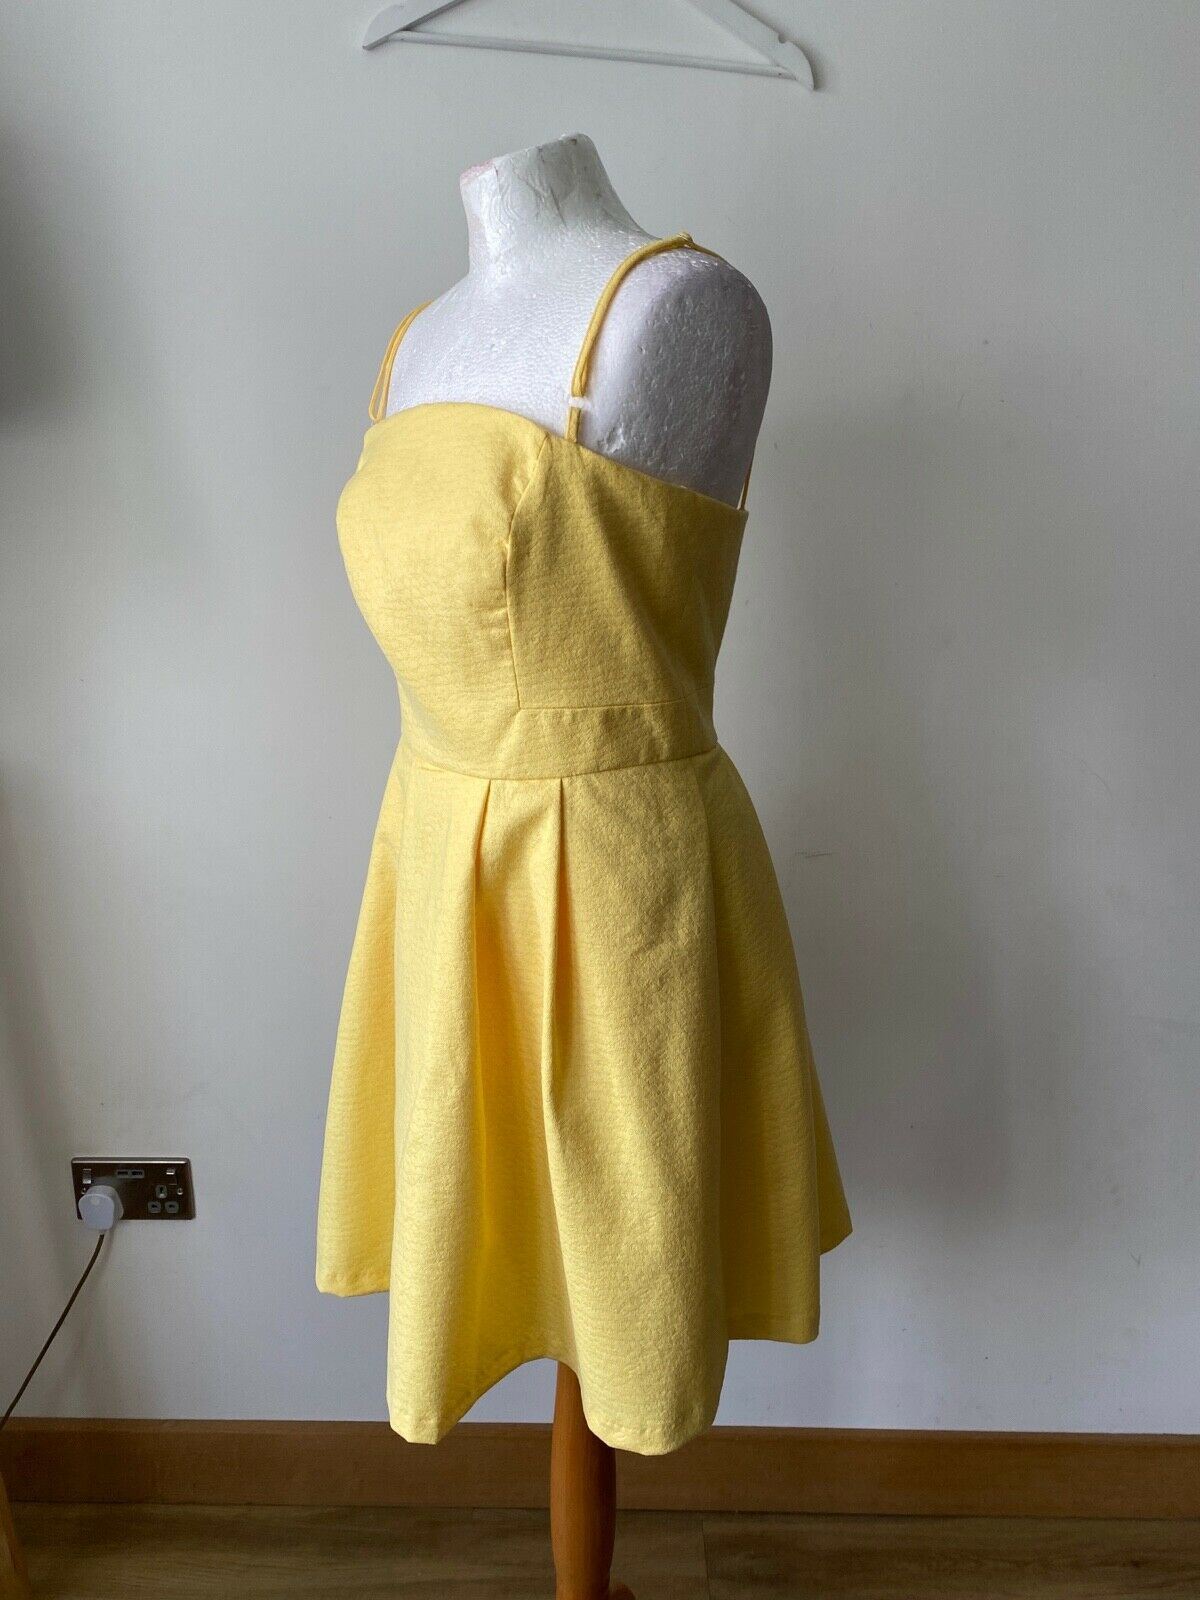 Mademoiselle R Yellow Skater Dress Bustier Top Size 12 UK RRP £59